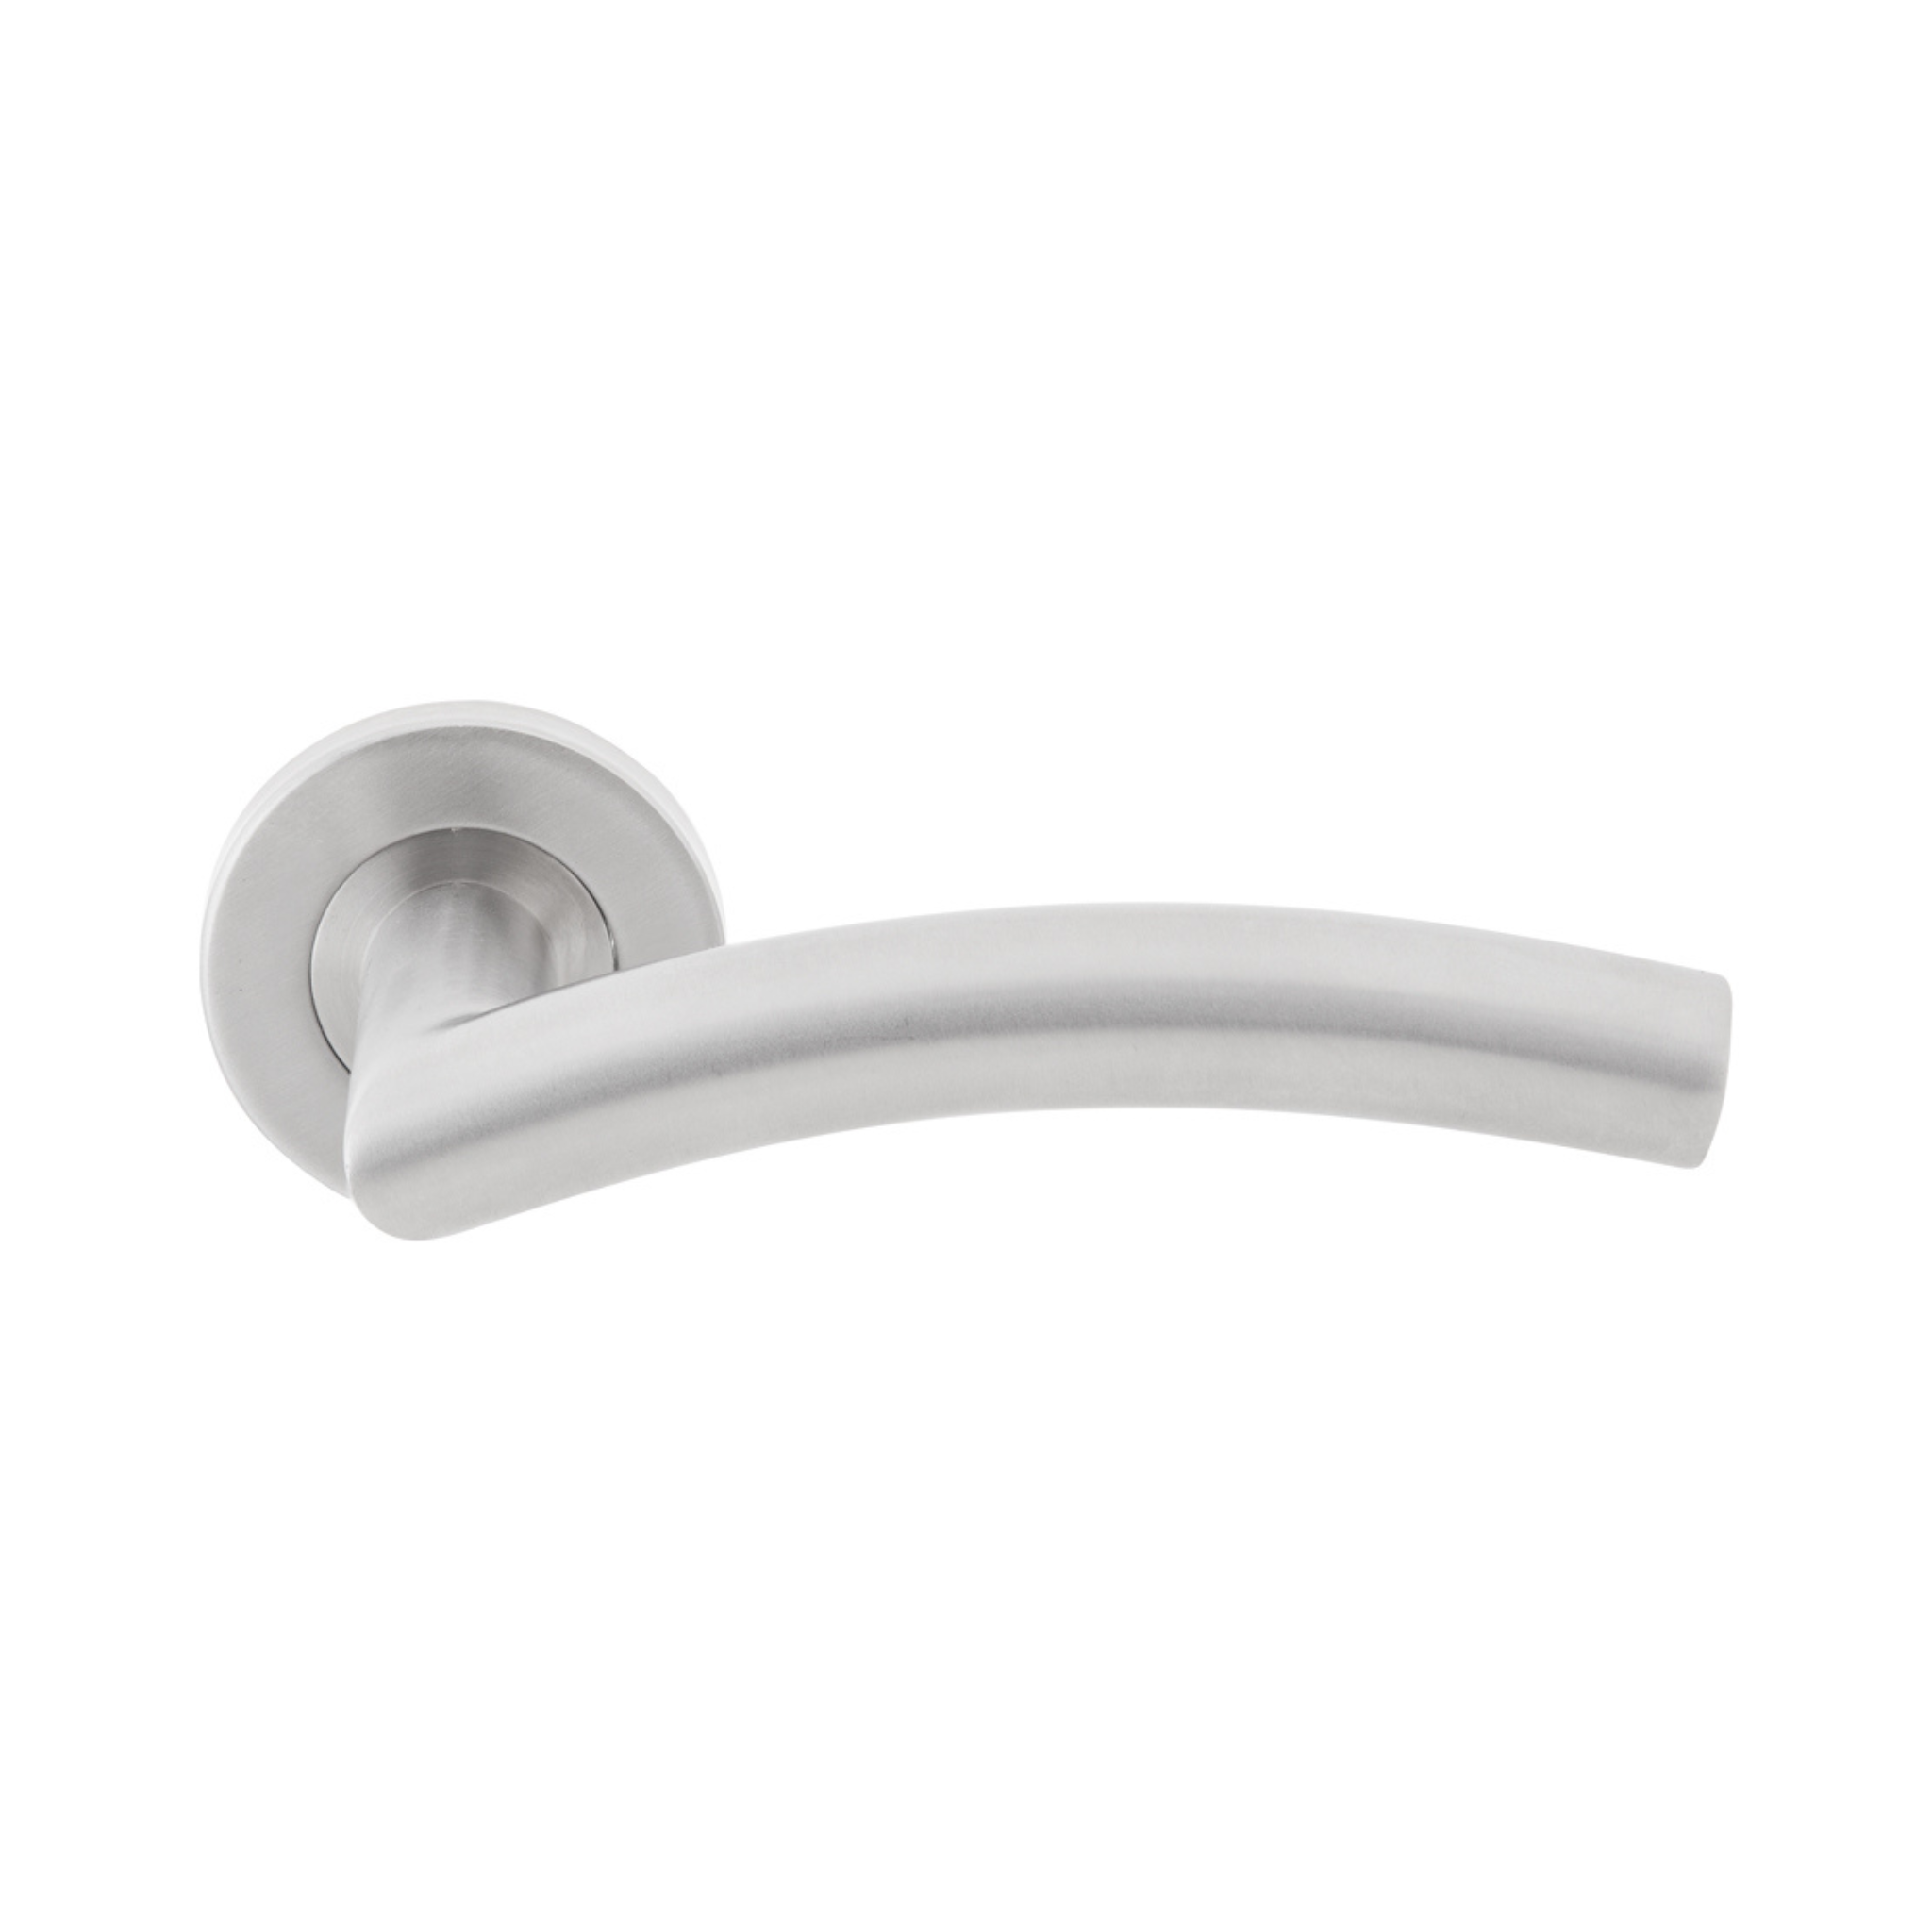 TH 123, Lever Handles, Tubular, On Round Rose, With Escutcheons, 143mm (l), Stainless Steel, DORMAKABA